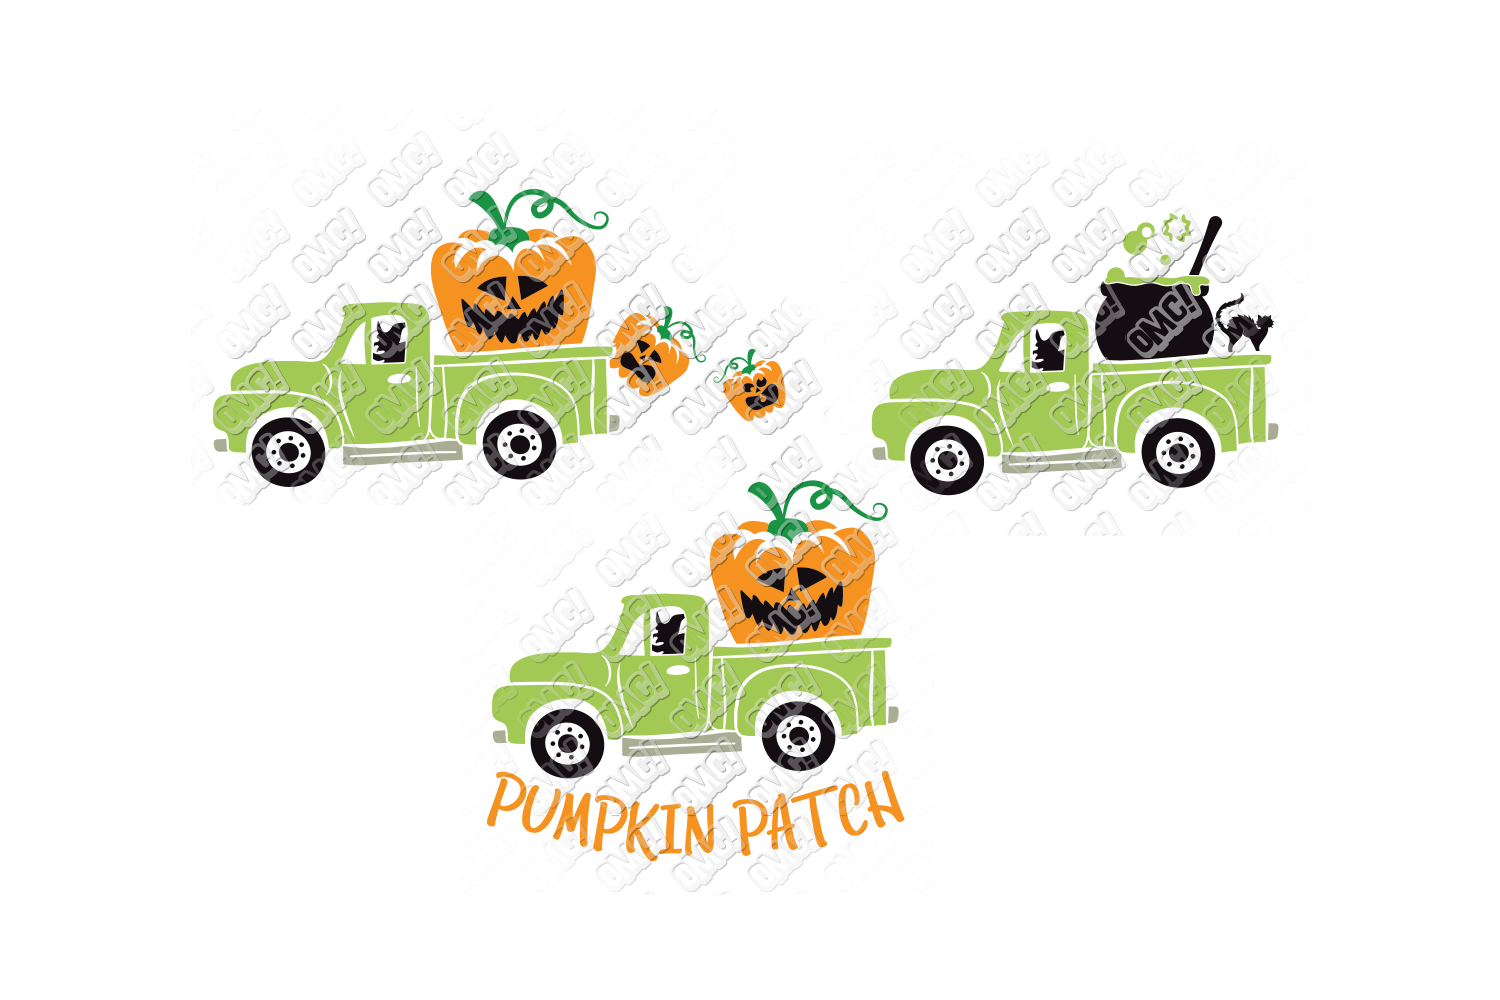 Pumpkin Tractor Truck SVG in SVG, DXF, PNG, EPS, JPEG ...